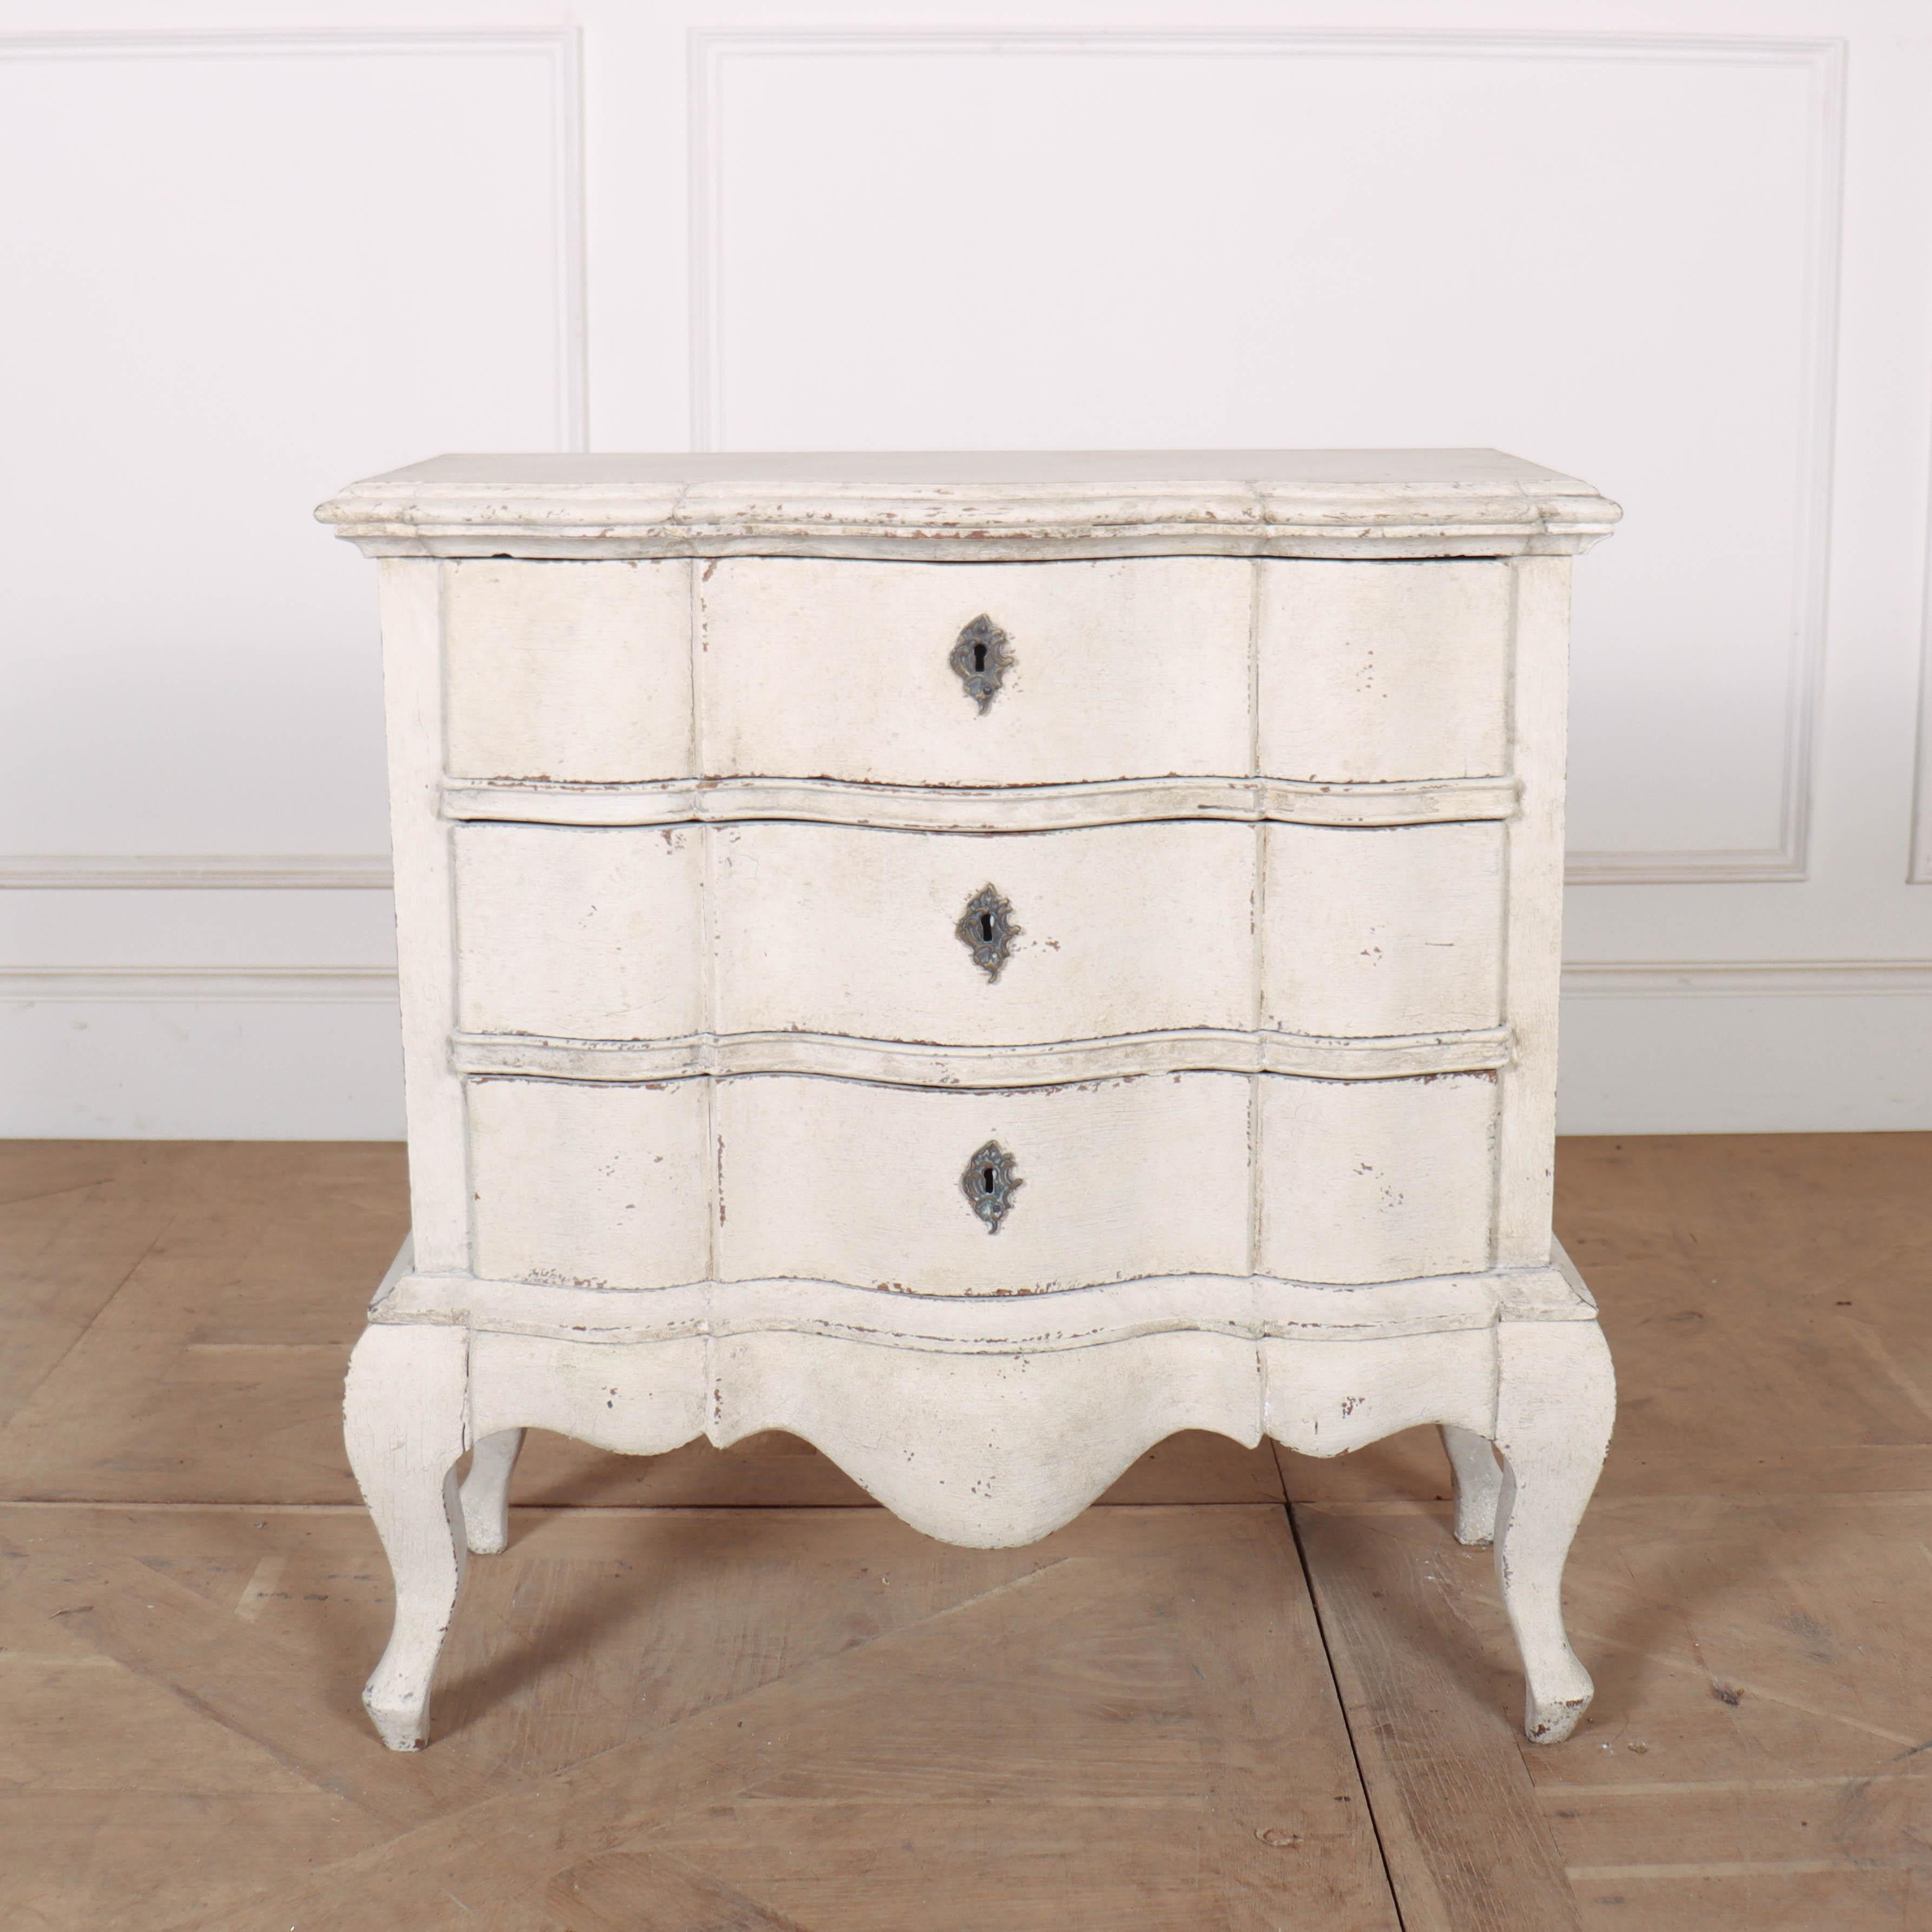 19th Century Danish Painted Bedside Commode For Sale